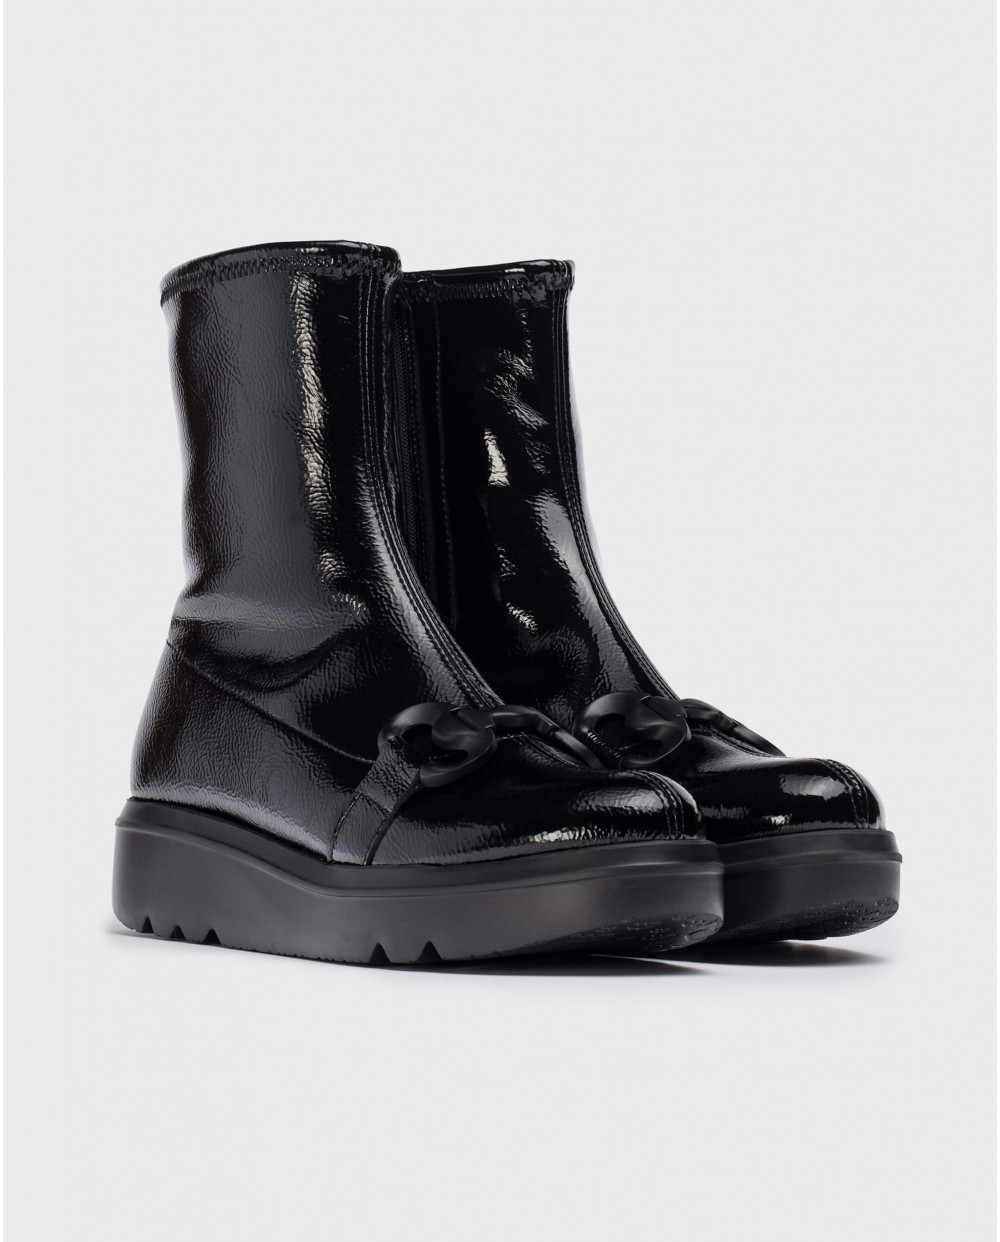 Wonders-Ankle Boots-Black CHICAGO ankle boot